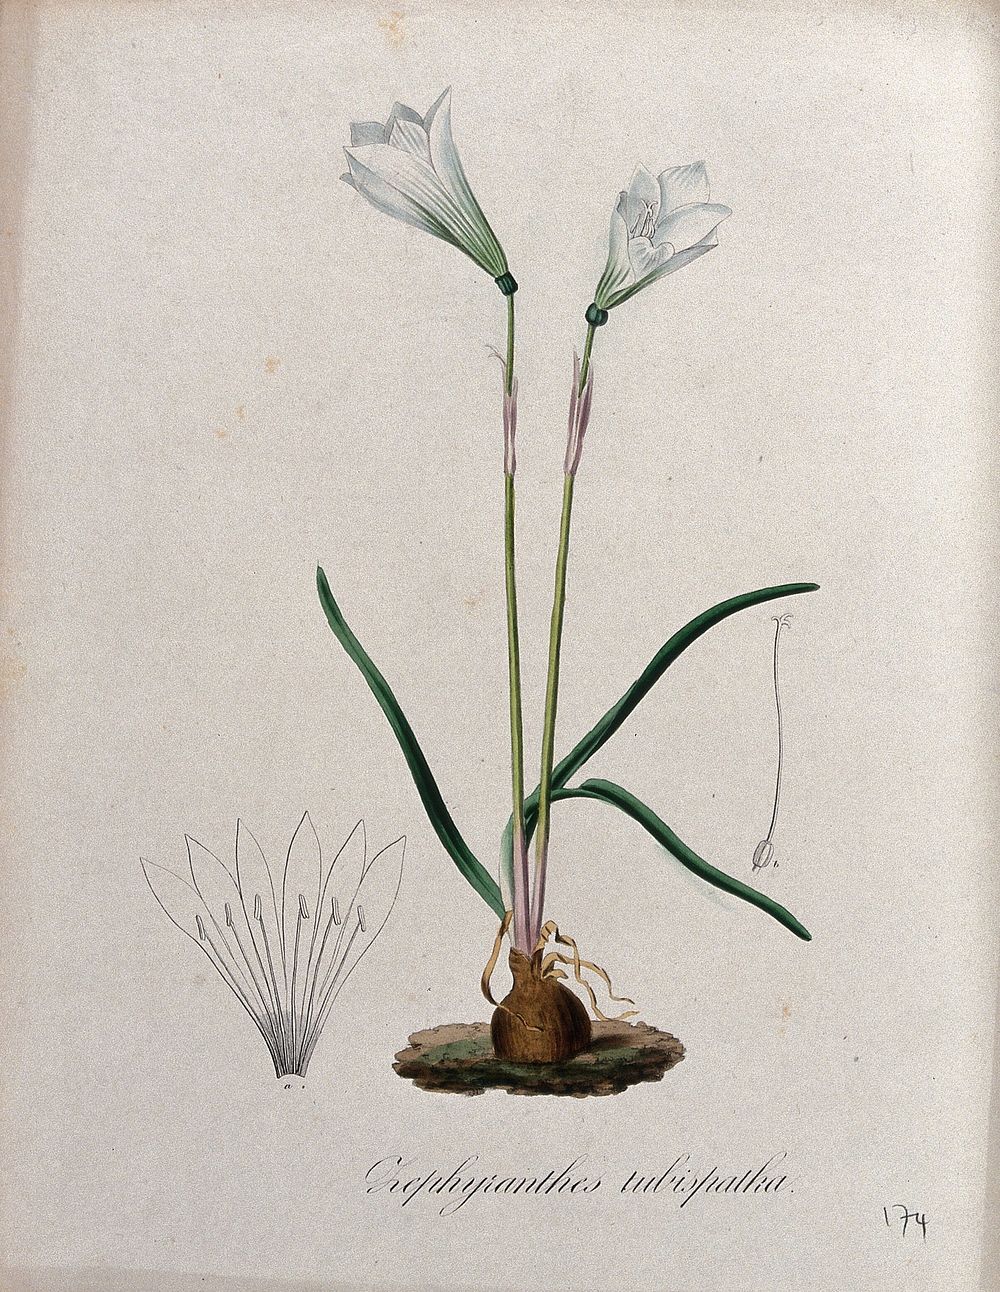 Barbados snowdrop (Zephyranthes tubispatha): flowering plant and floral segments. Coloured lithograph.